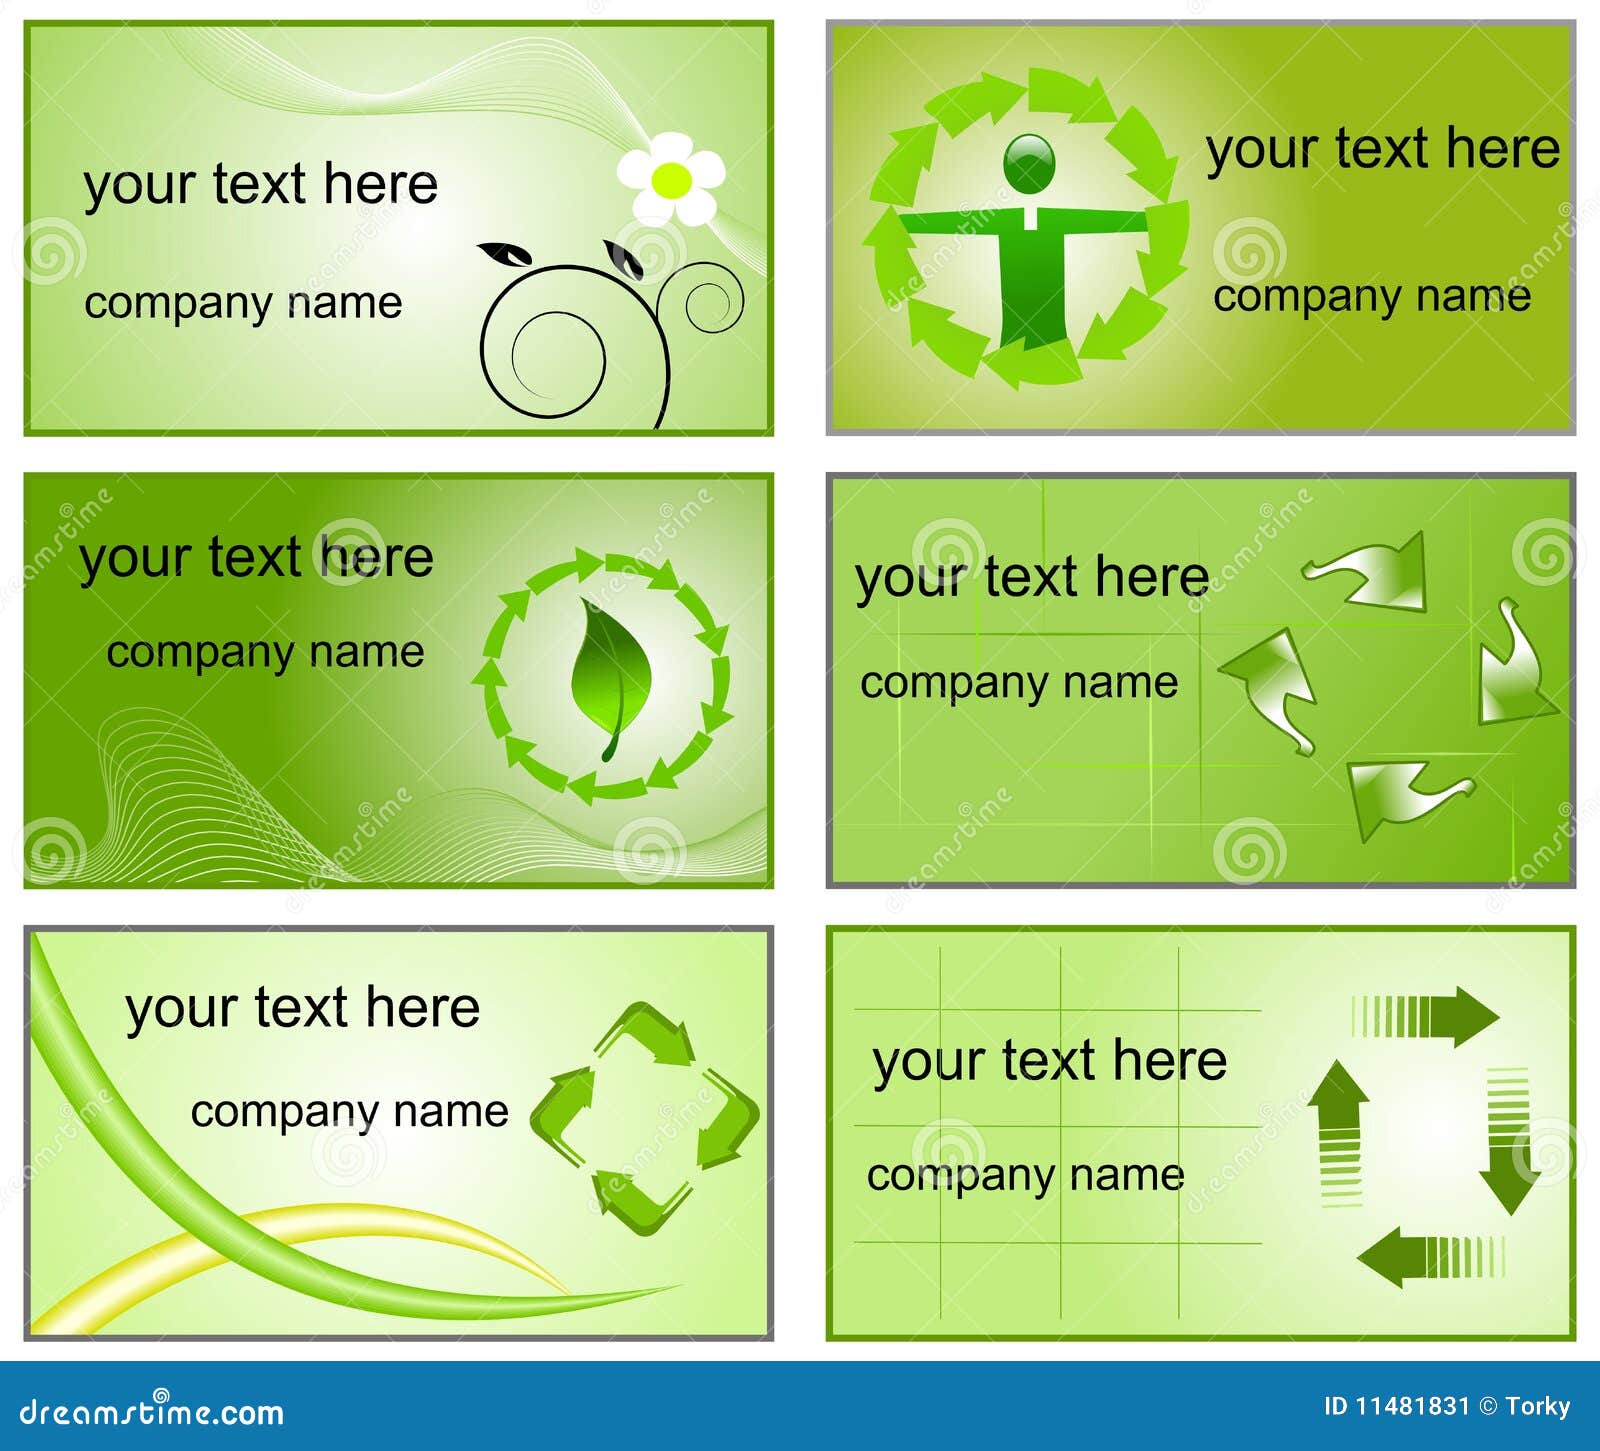 recycling business cards ideas 5